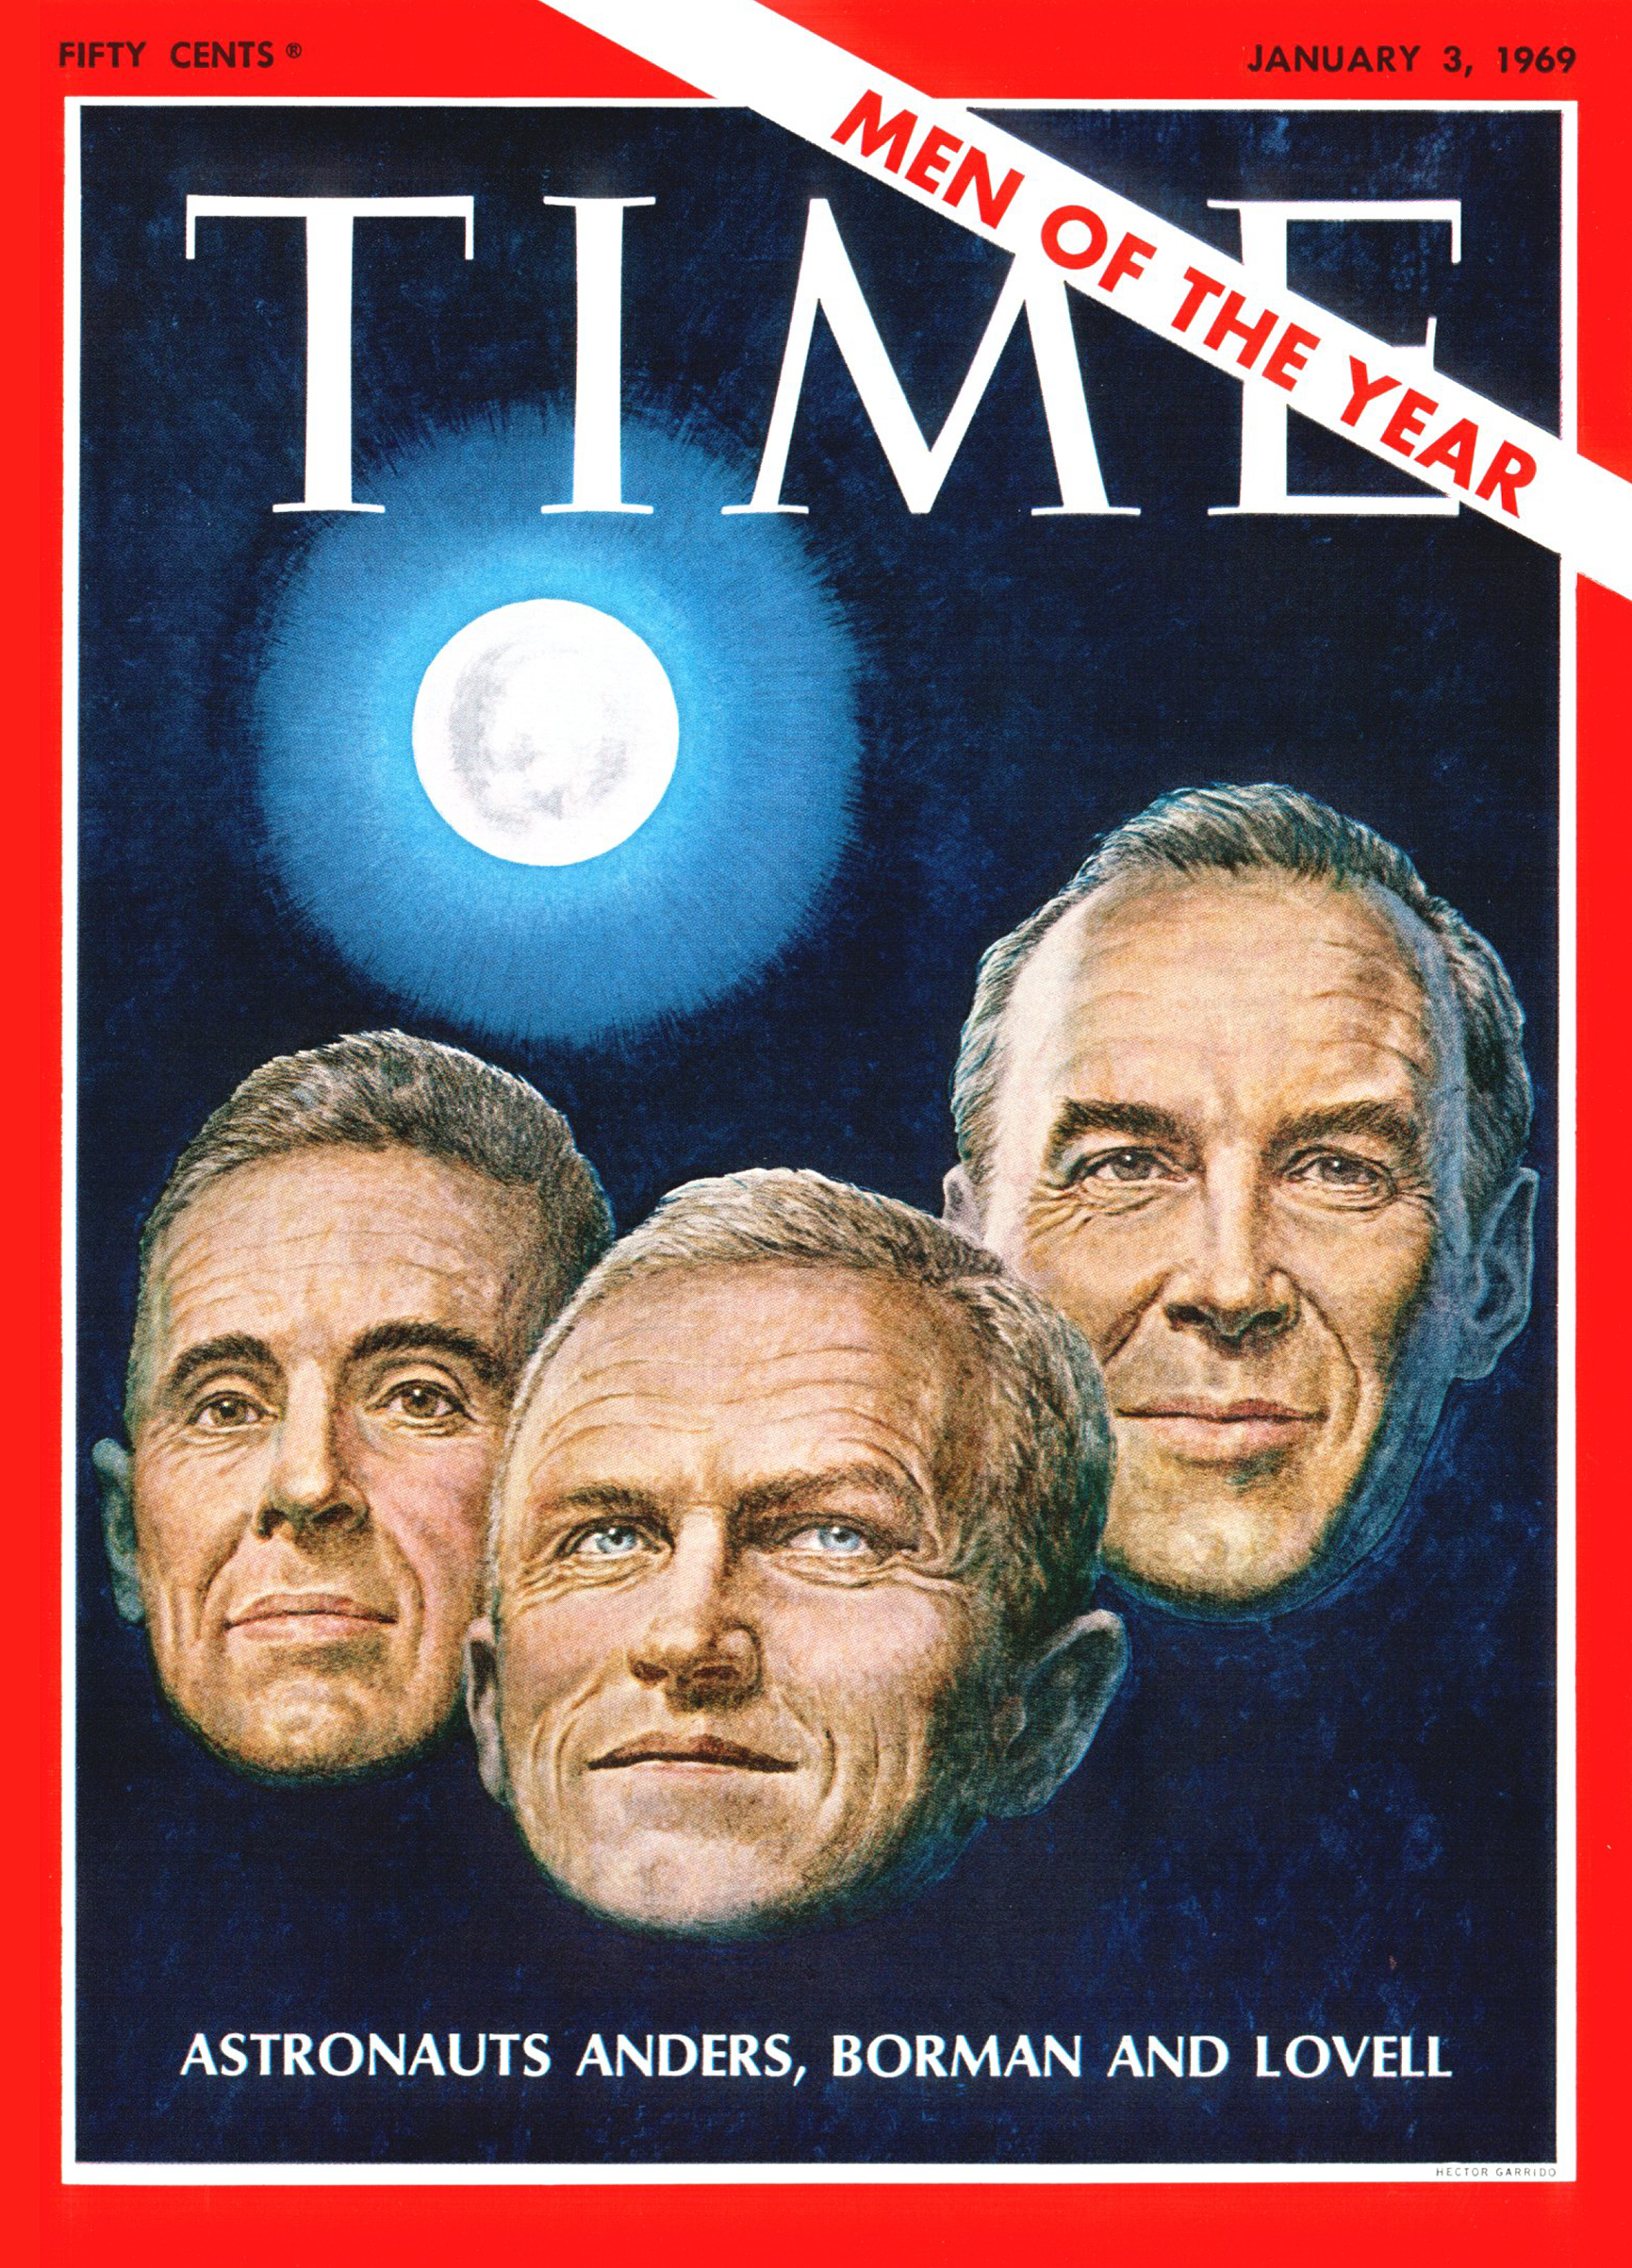 Fifty years ago, Apollo 8 astronauts Bill Anders, Frank Borman and Jim Lovell were a late but compelling choice for TIME’s Men of the Year.